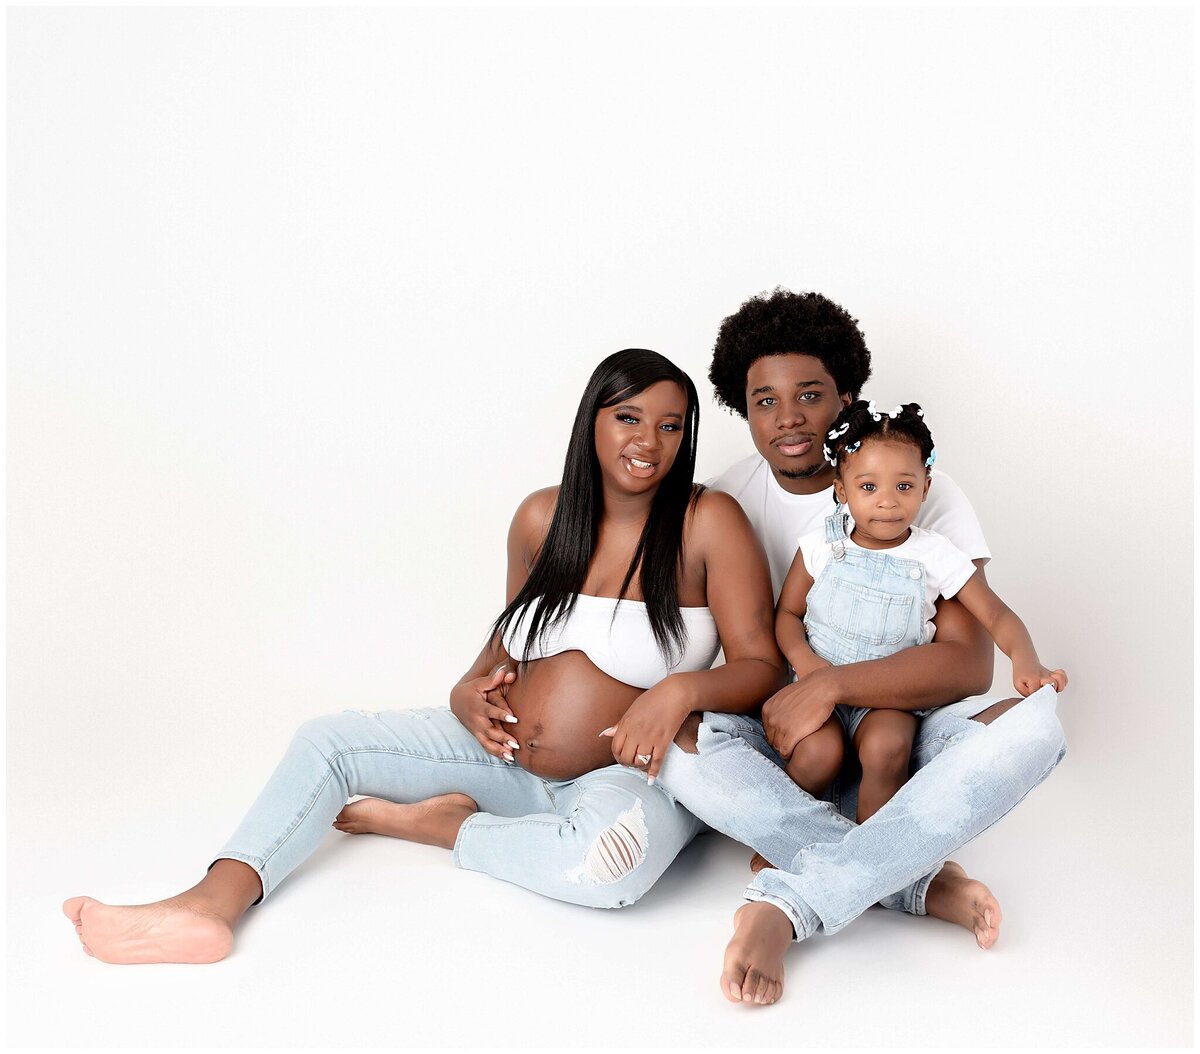 Family of three, including a pregnant woman, her partner, and their young girl, pose together in a professional studio setting on white backdrop for a maternity family session.